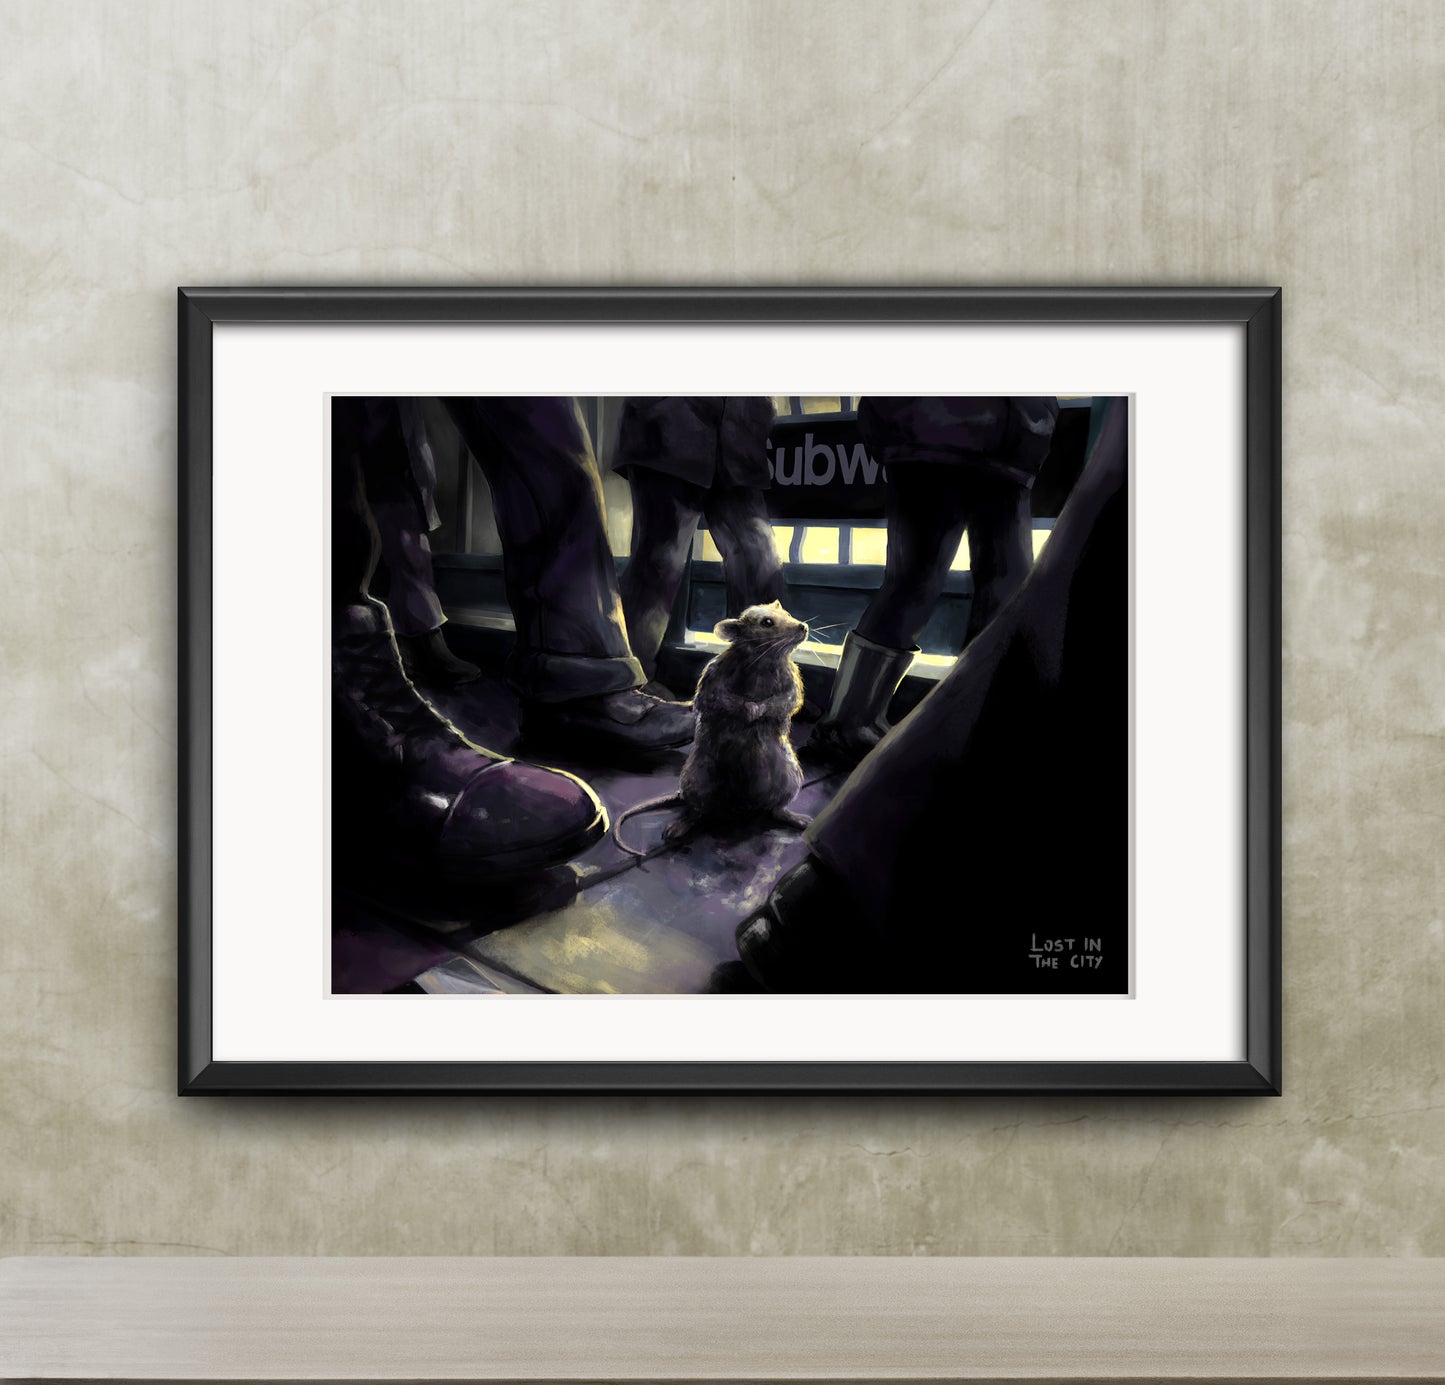 Subway Rat Print | Lost in the City